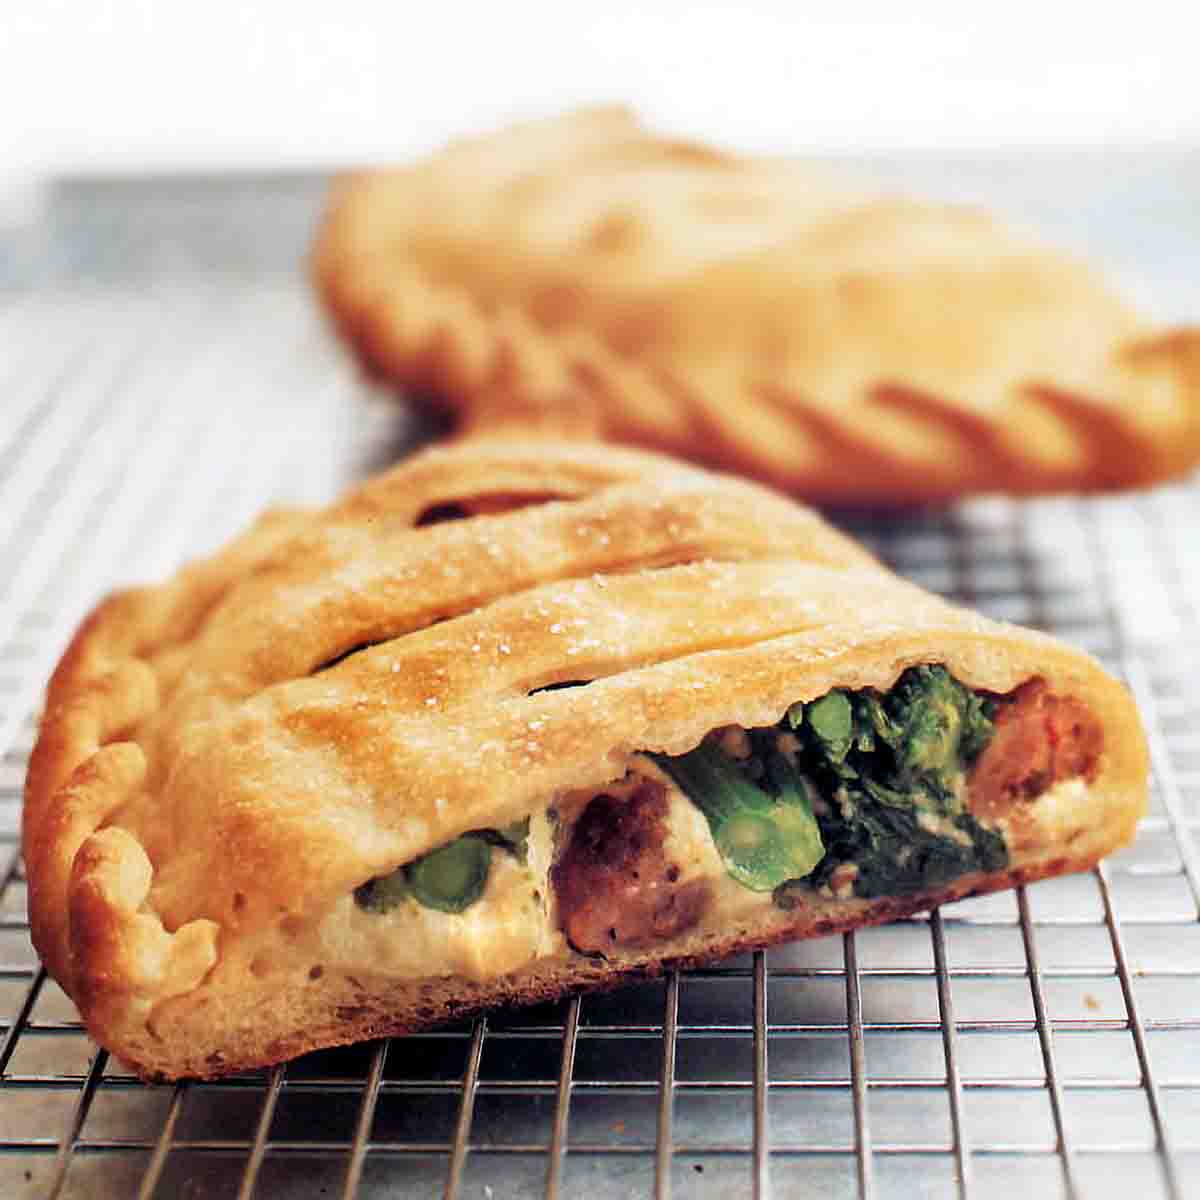 Two ricotta calzones with sausage and broccoli rabe, one cut in half, the other whole, on a wire rack.